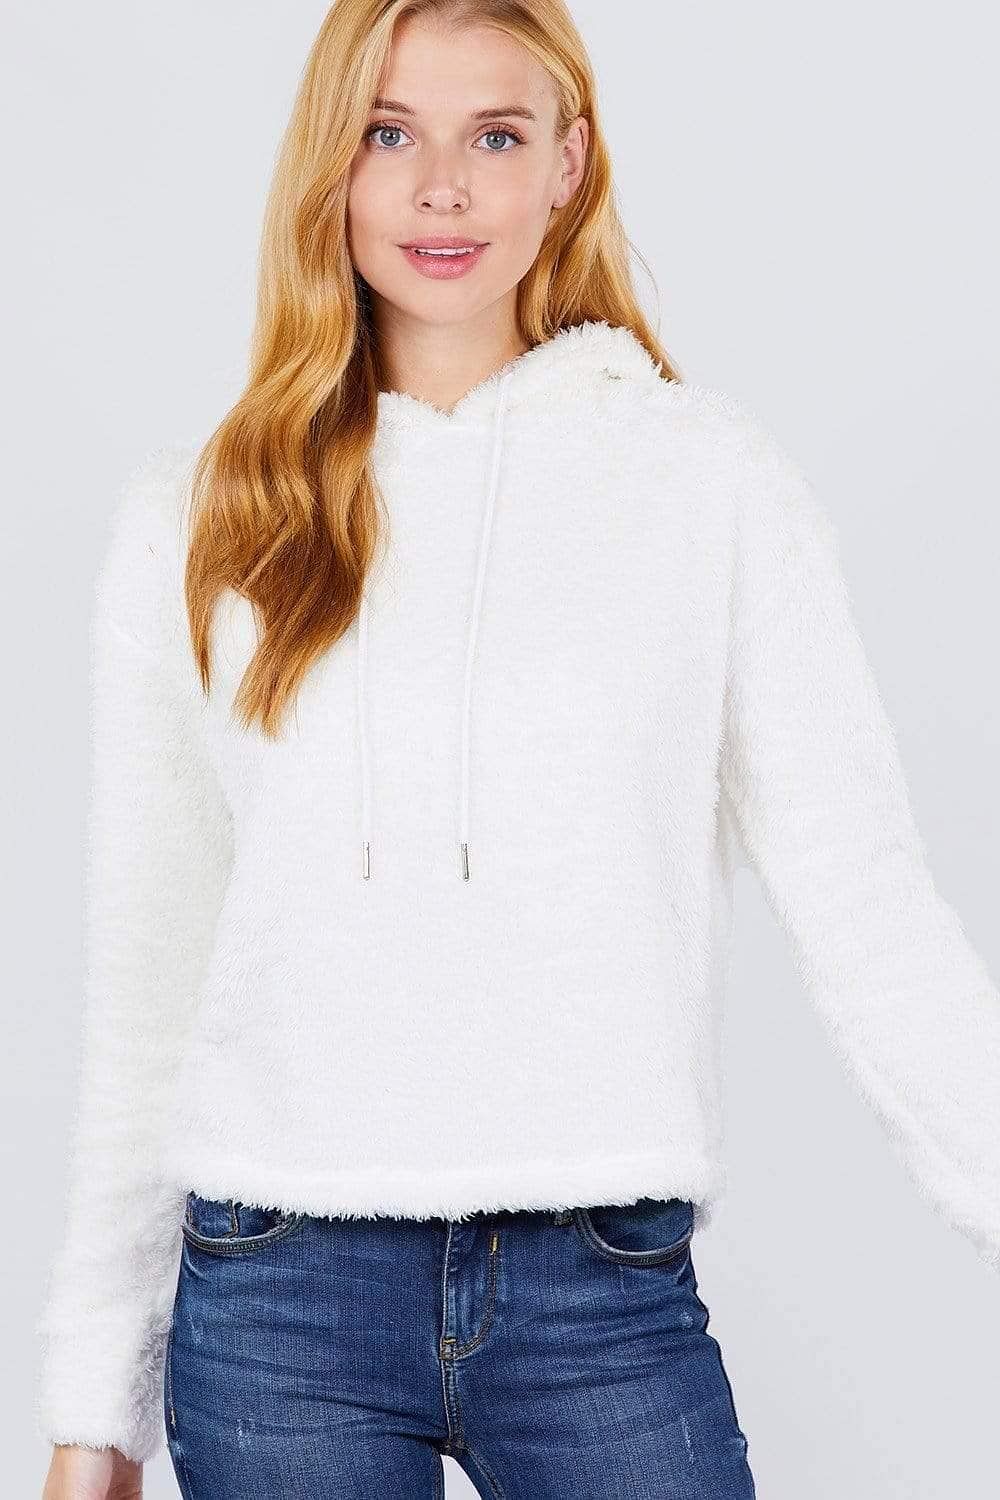 Ivory Long Sleeve Faux Fur Sweater - Shopping Therapy, LLC Top